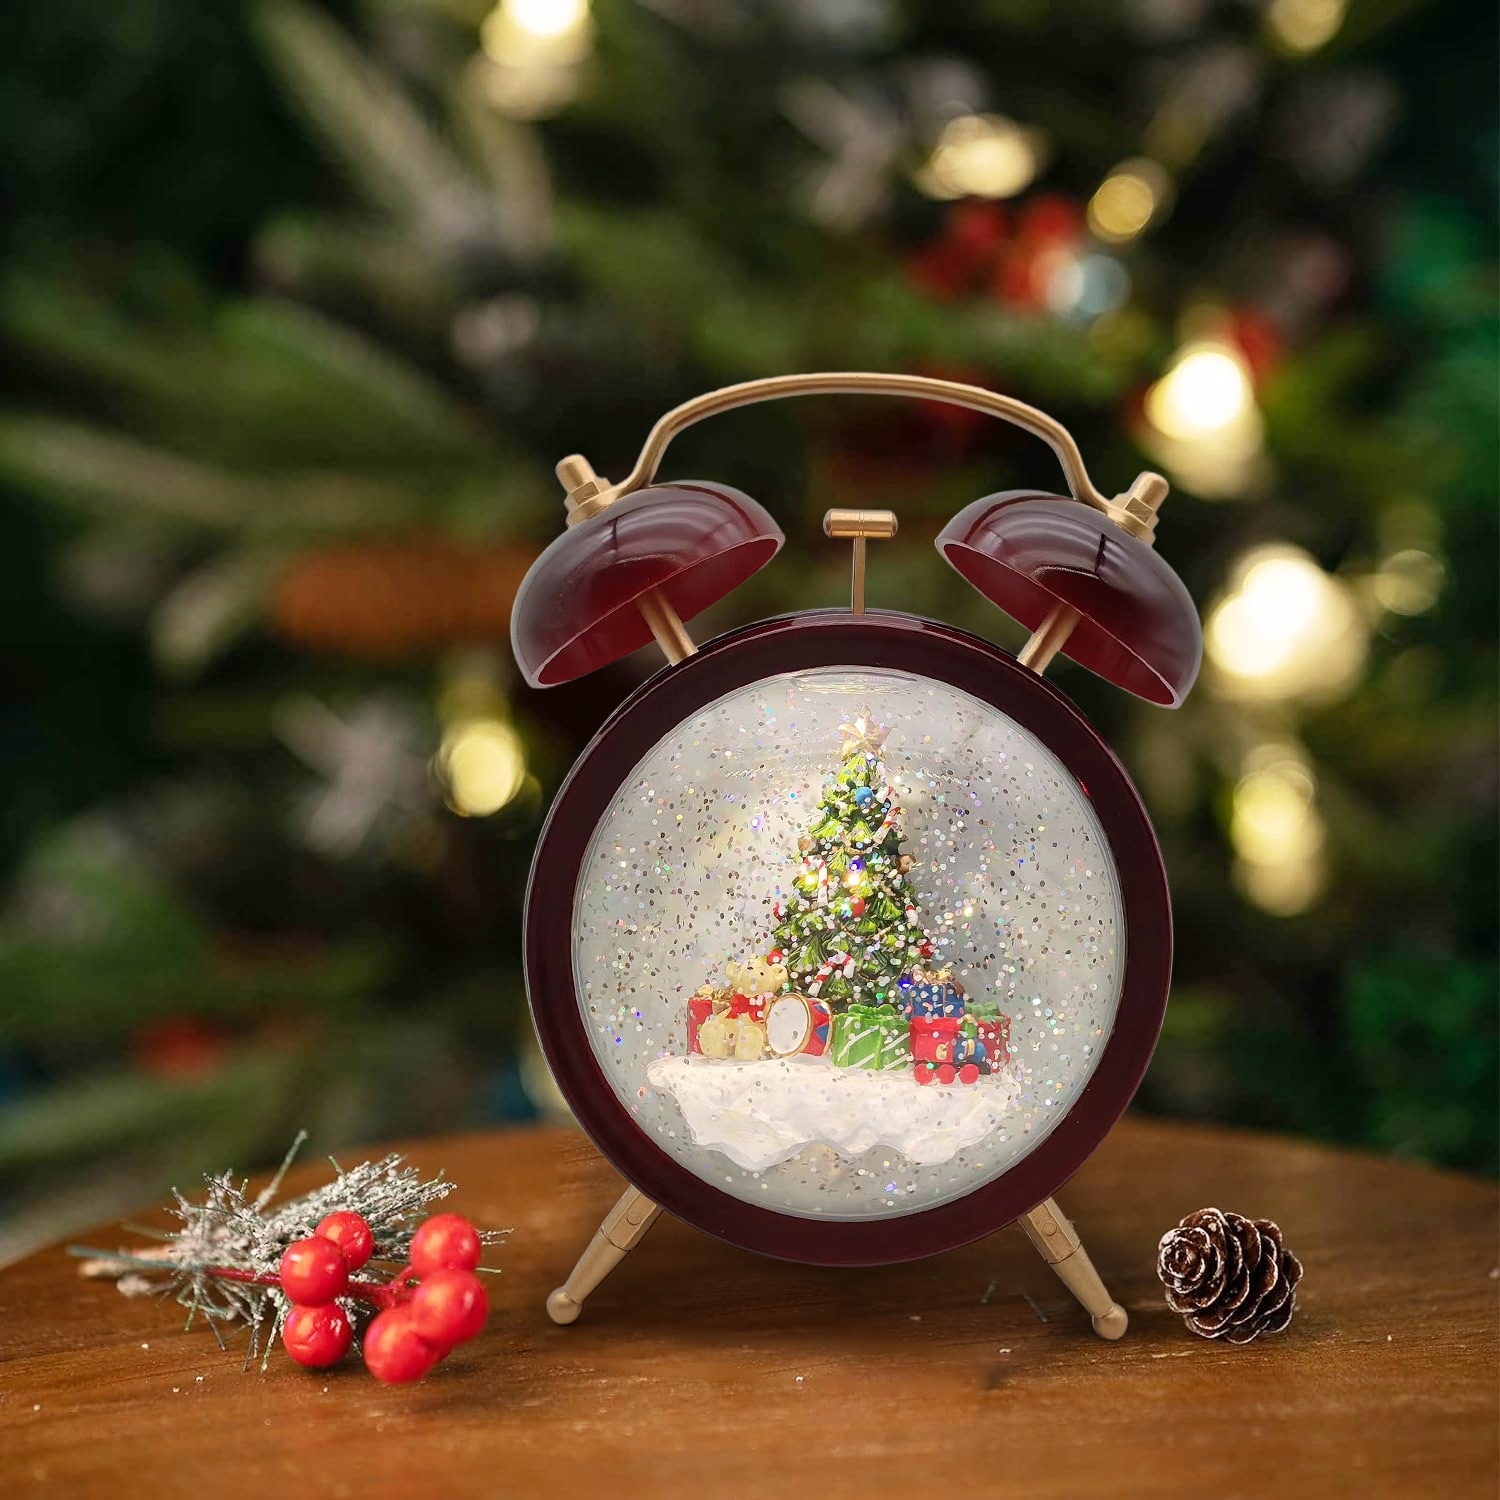 https://ak1.ostkcdn.com/images/products/is/images/direct/cbe5f2759caa445112c493f3dda1b300e95a930c/Christmas-Alarm-Clock-Style-Glitter-Snow-Globe-Snowman-and-Snowkids-with-Gifts-and-Christmas-Tree-Happy-Holidays.jpg